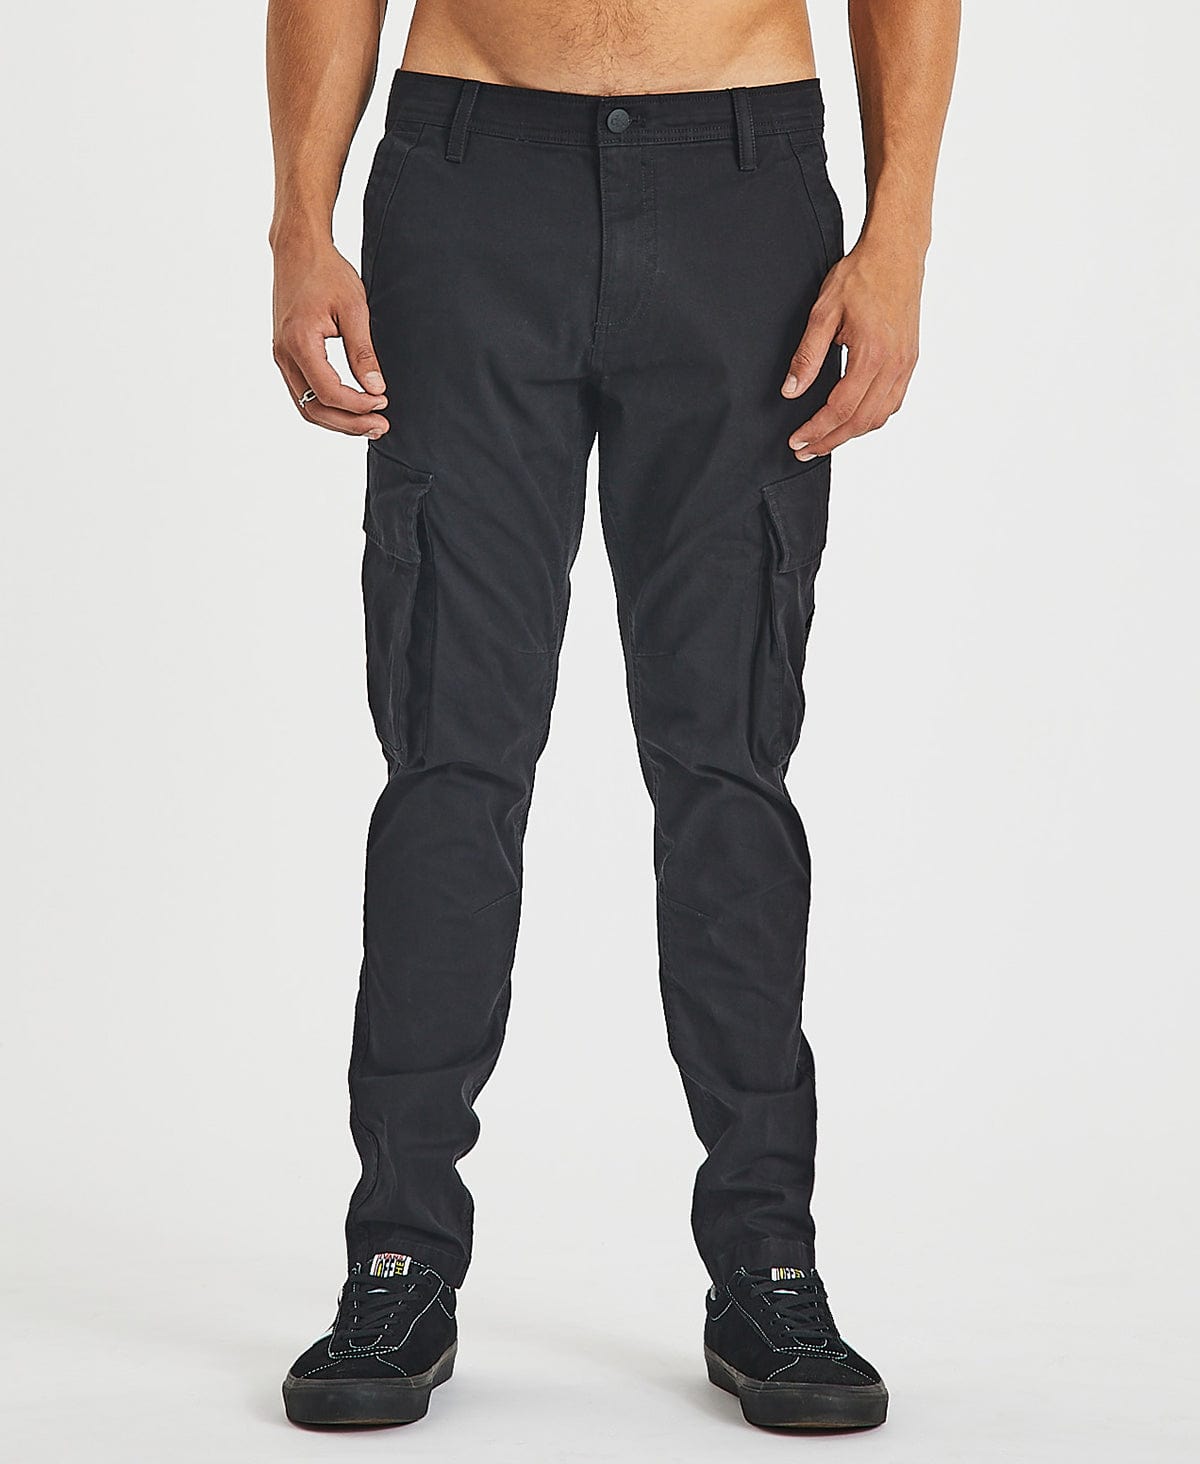 Chiccall Black Cargo Pants For Men Casual Trousers Regular, 53% OFF